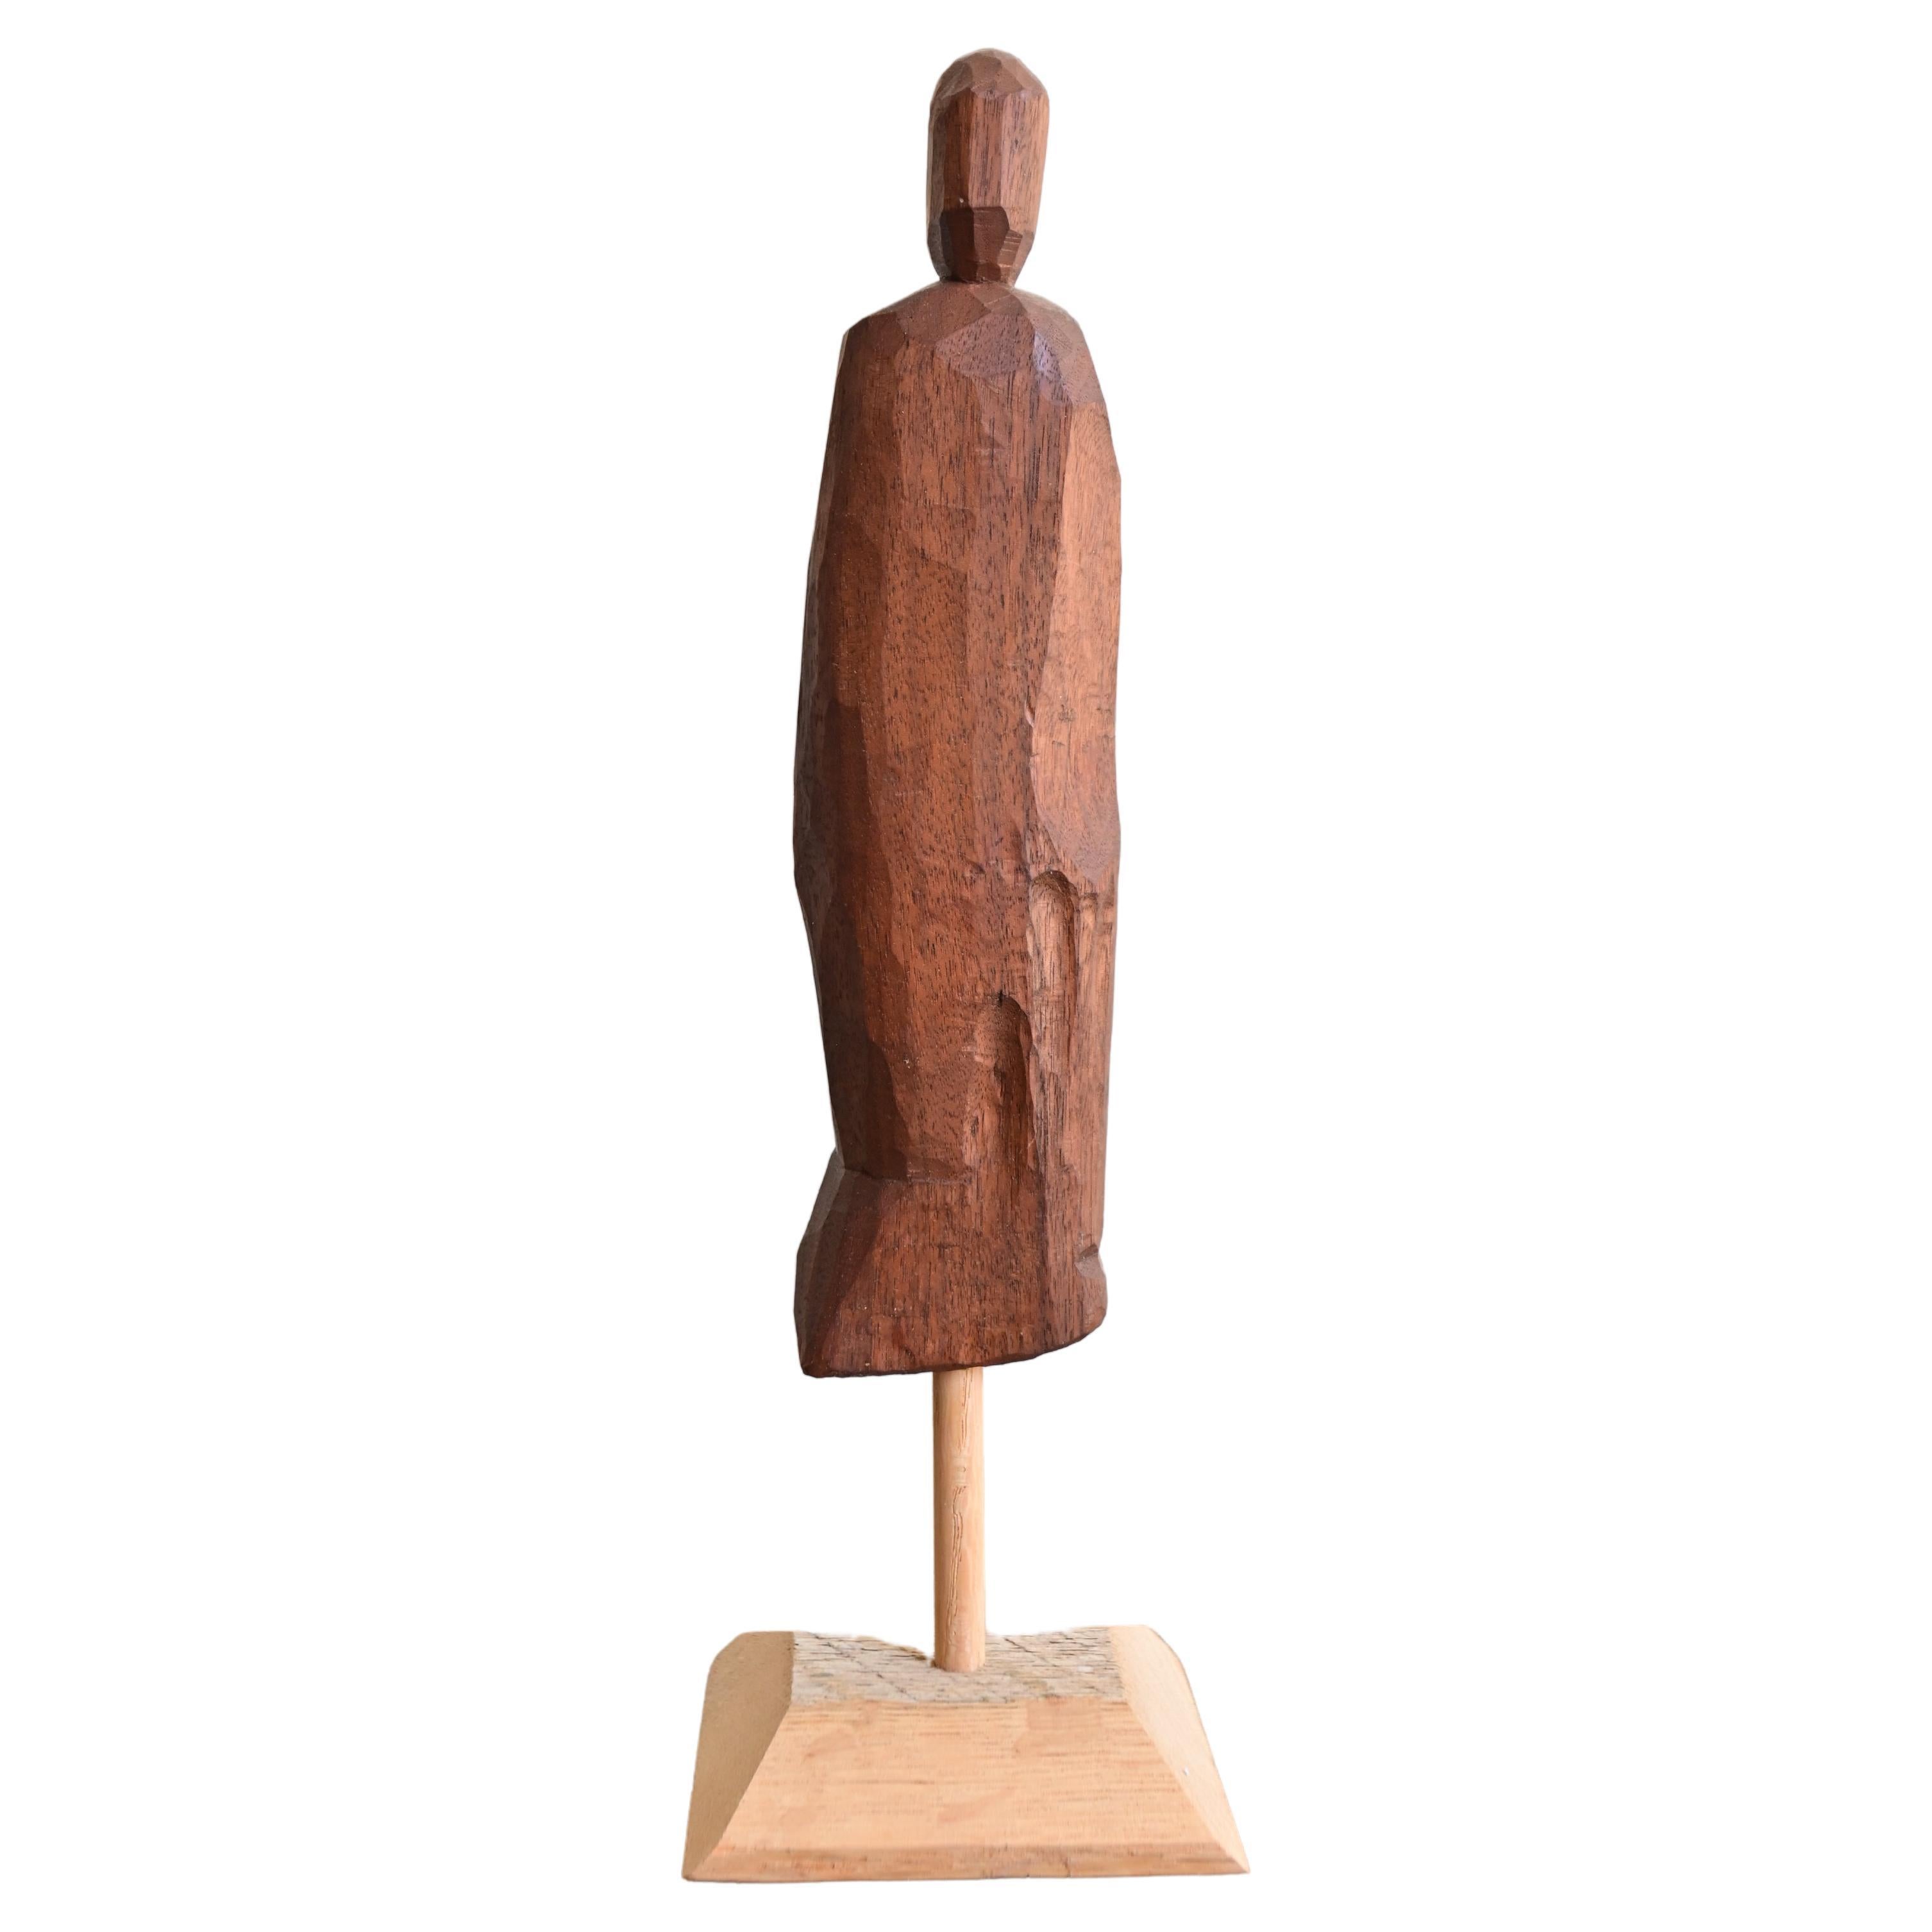 Abstract Wooden Figure For Sale